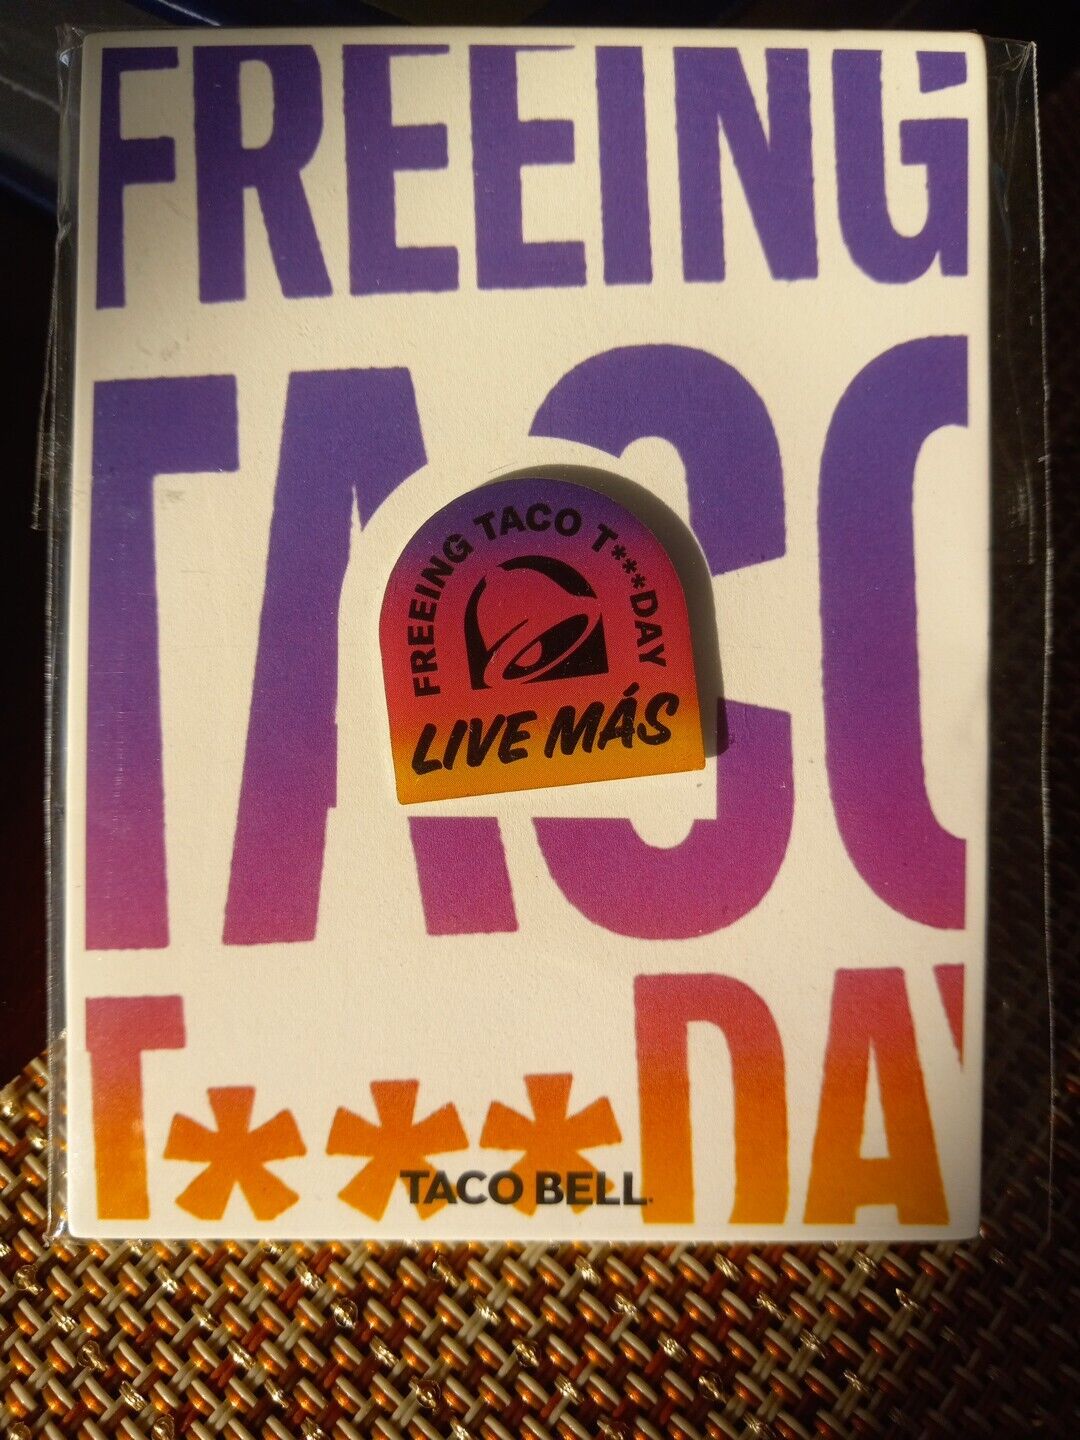 Freeing Taco Tuesday Taco Bell Live Mas Lapel Pin